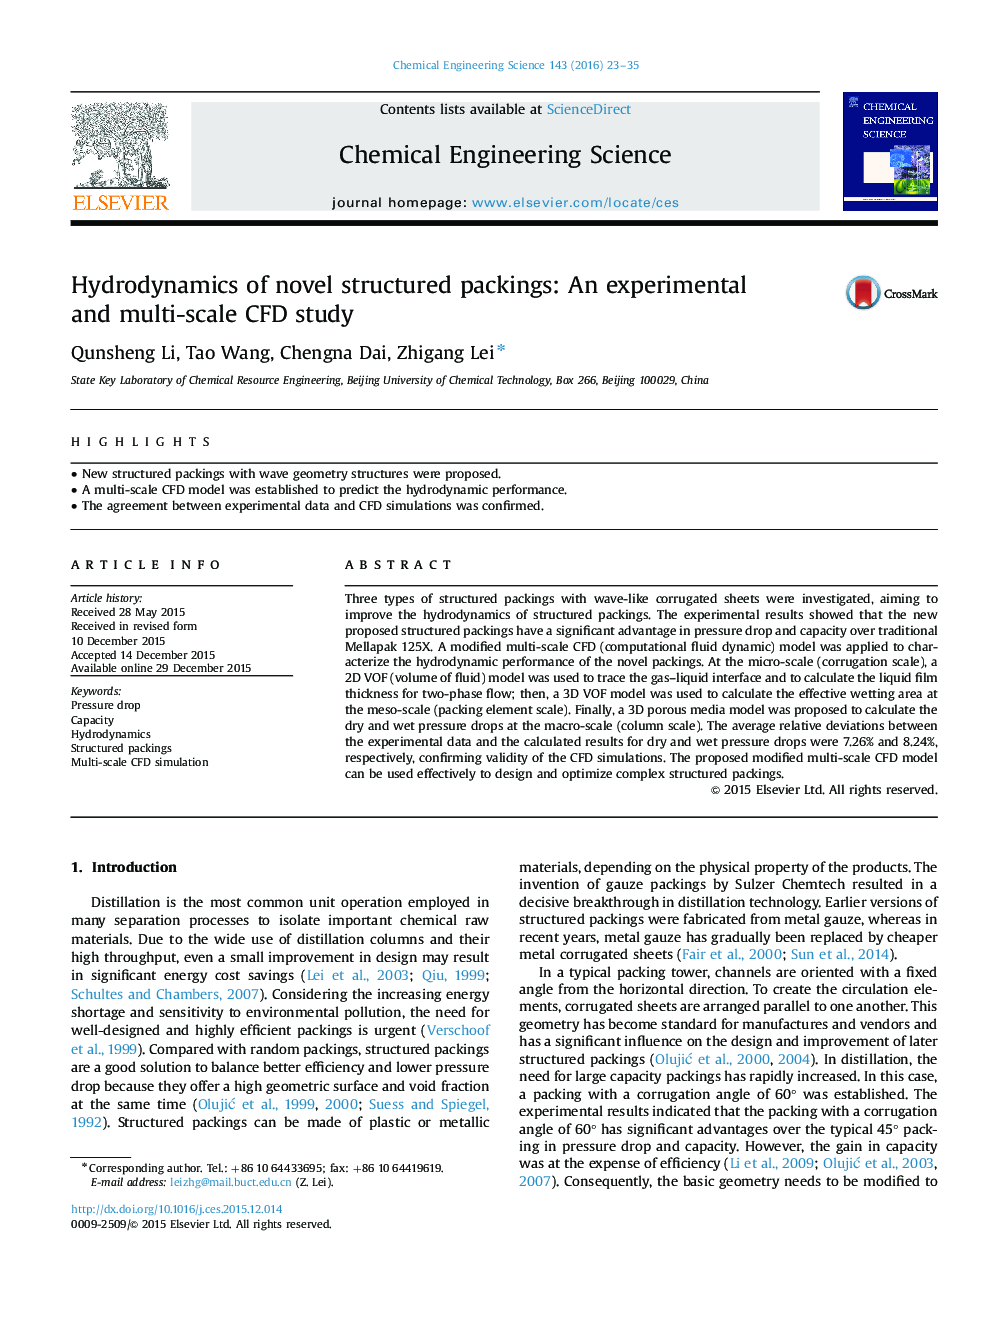 Hydrodynamics of novel structured packings: An experimental and multi-scale CFD study